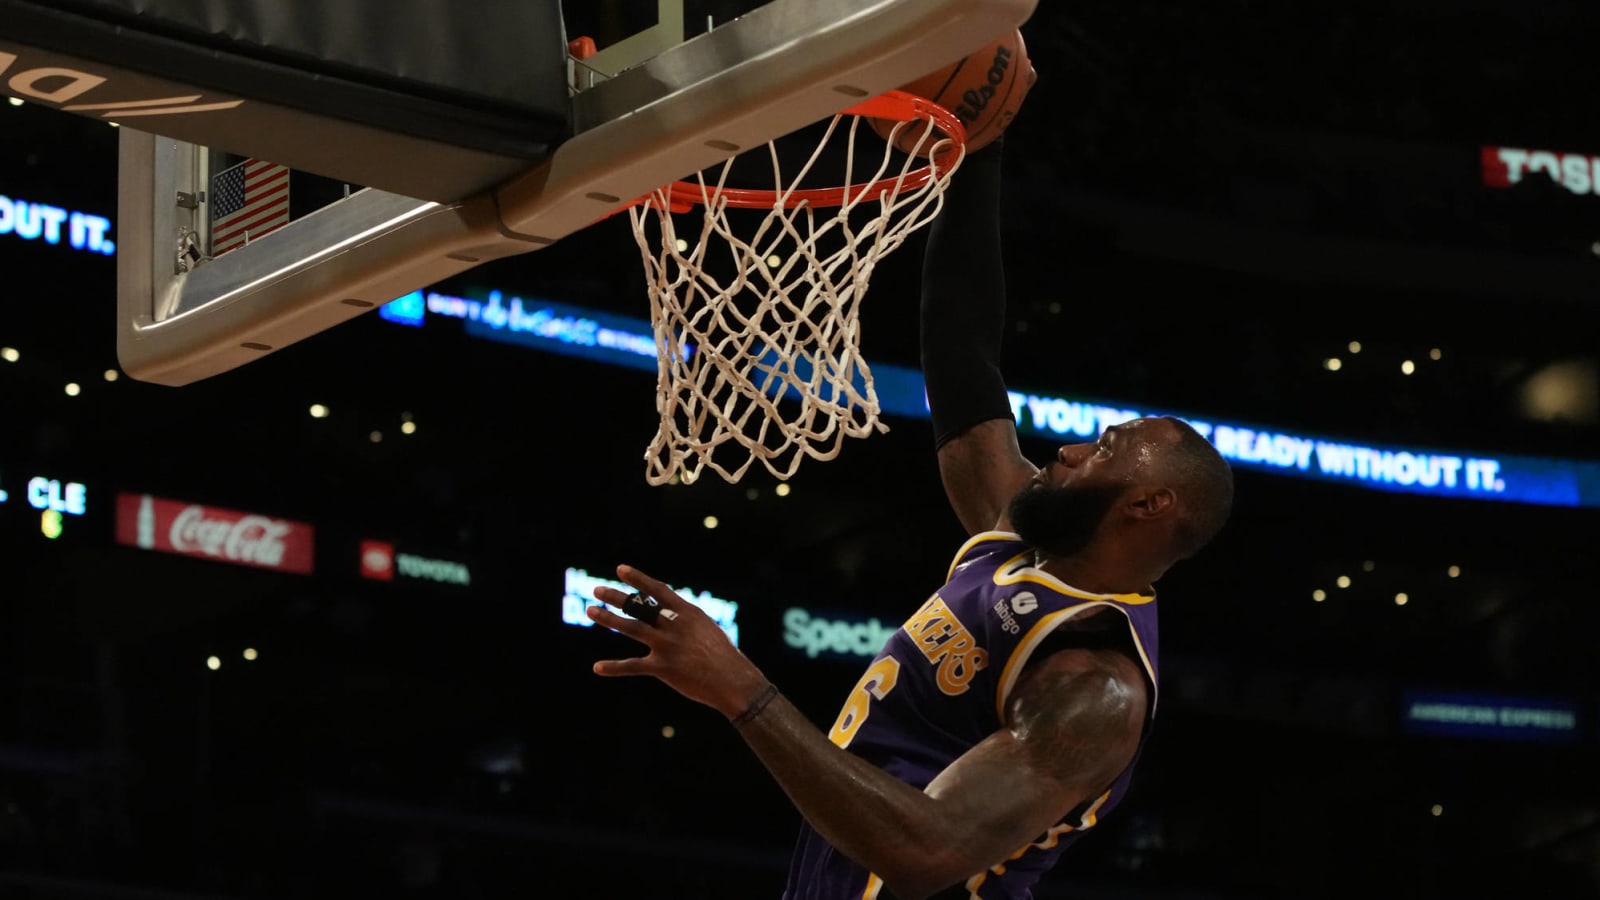 LeBron James' 14-year-old son Bryce can now dunk